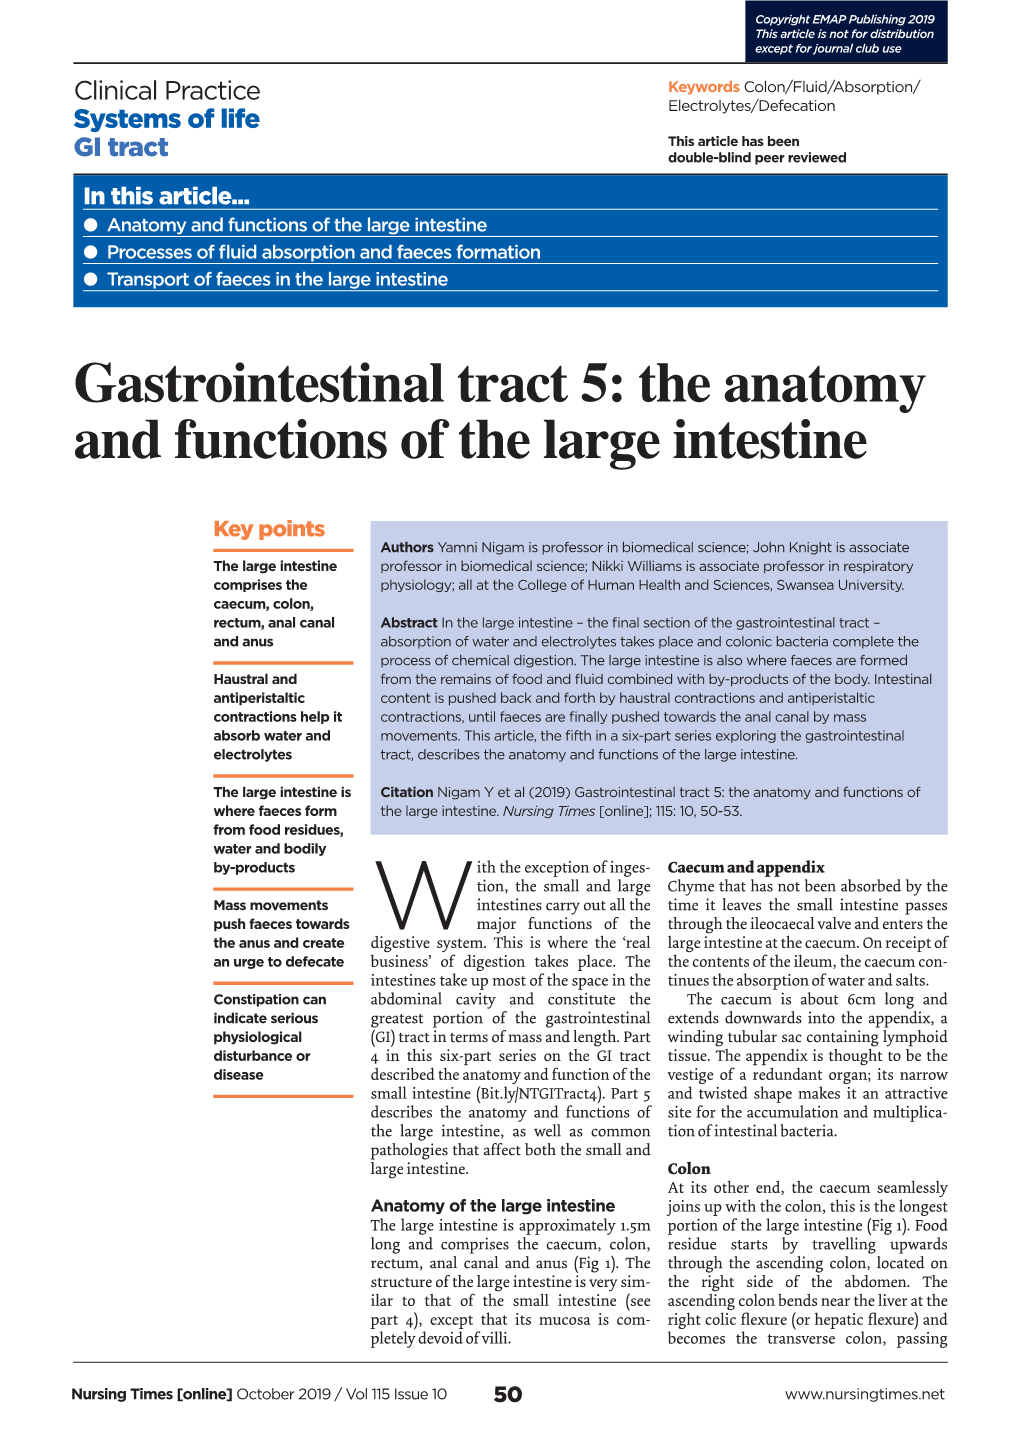 Gastrointestinal Tract 5: the Anatomy and Functions of the Large Intestine